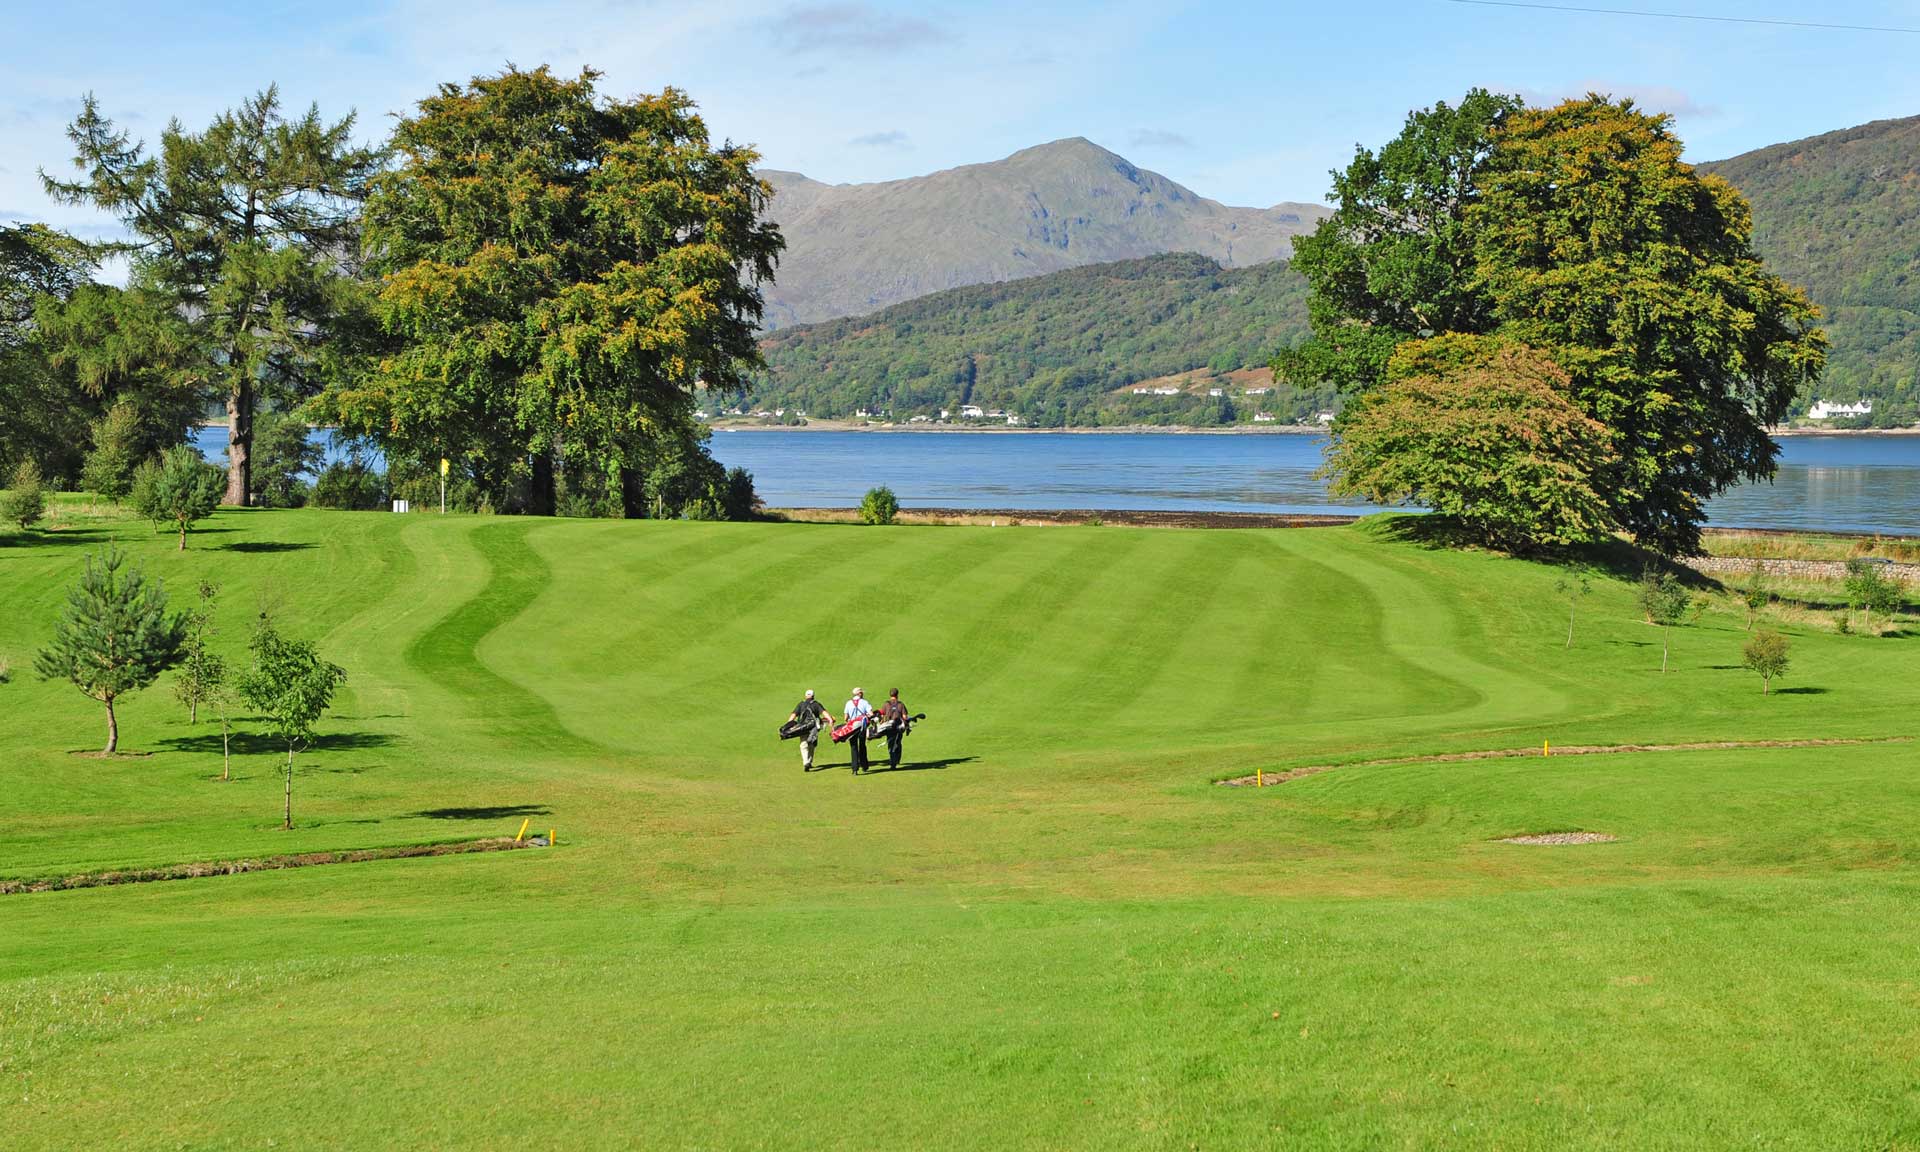 Golf at Woodlands Estate just a short drive away from our Glencoe Hideaways